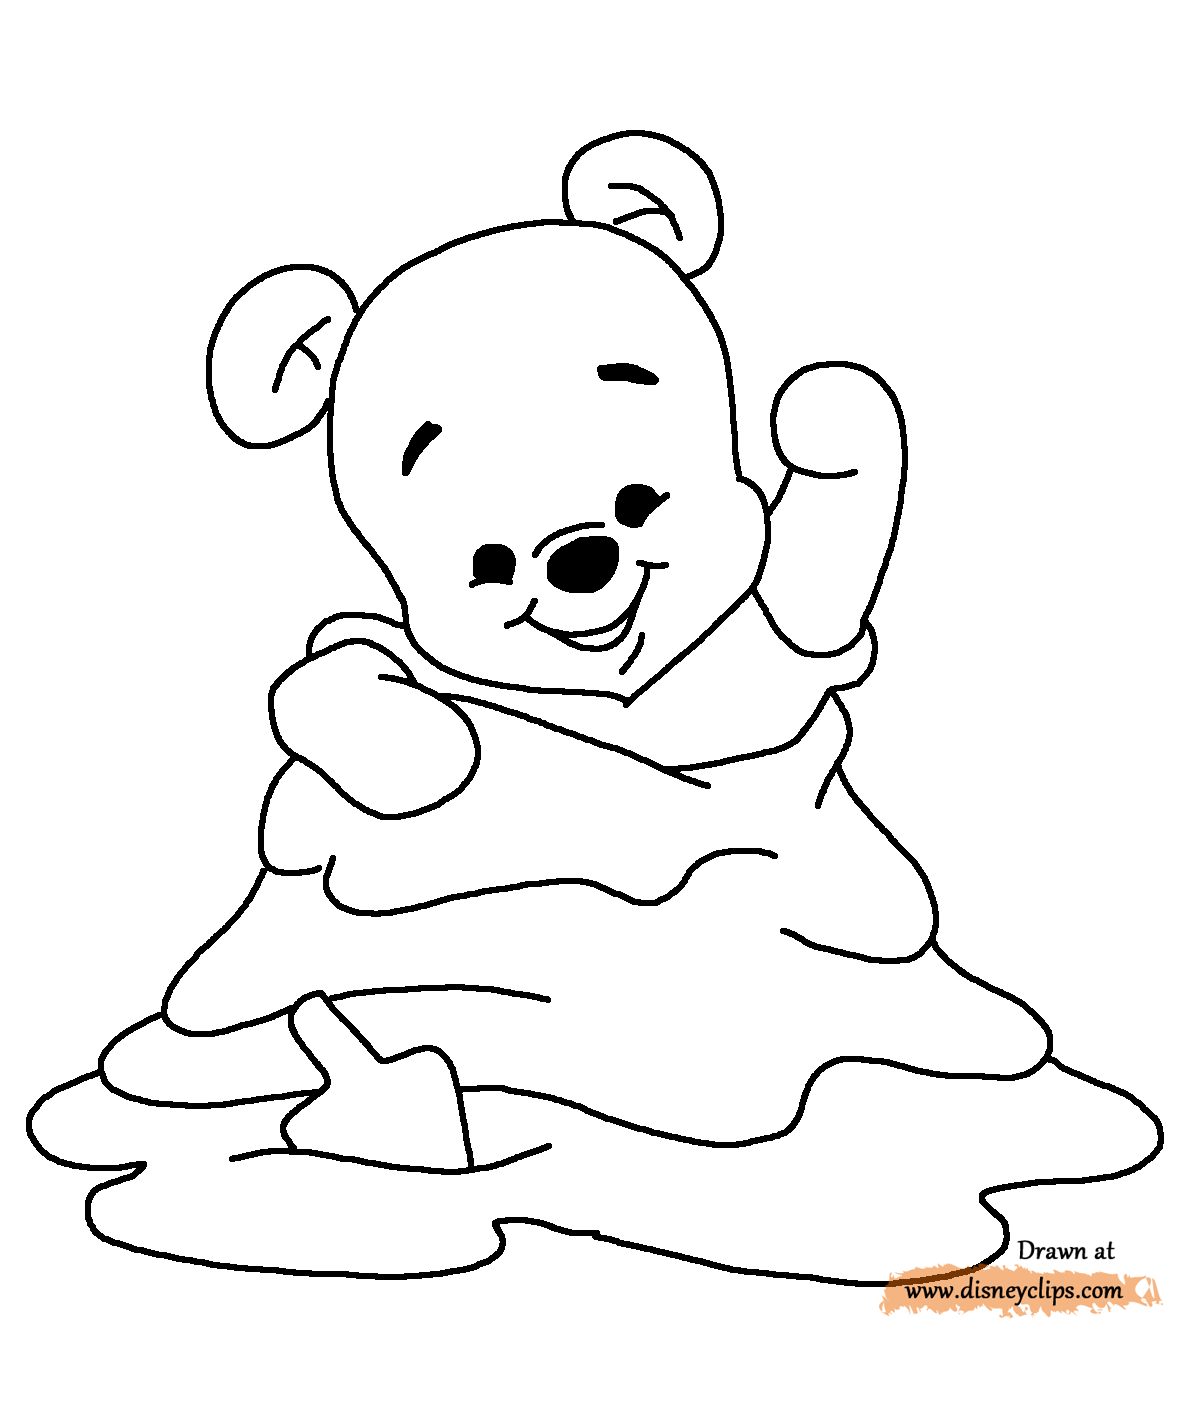 Baby Winnie The Pooh coloring page